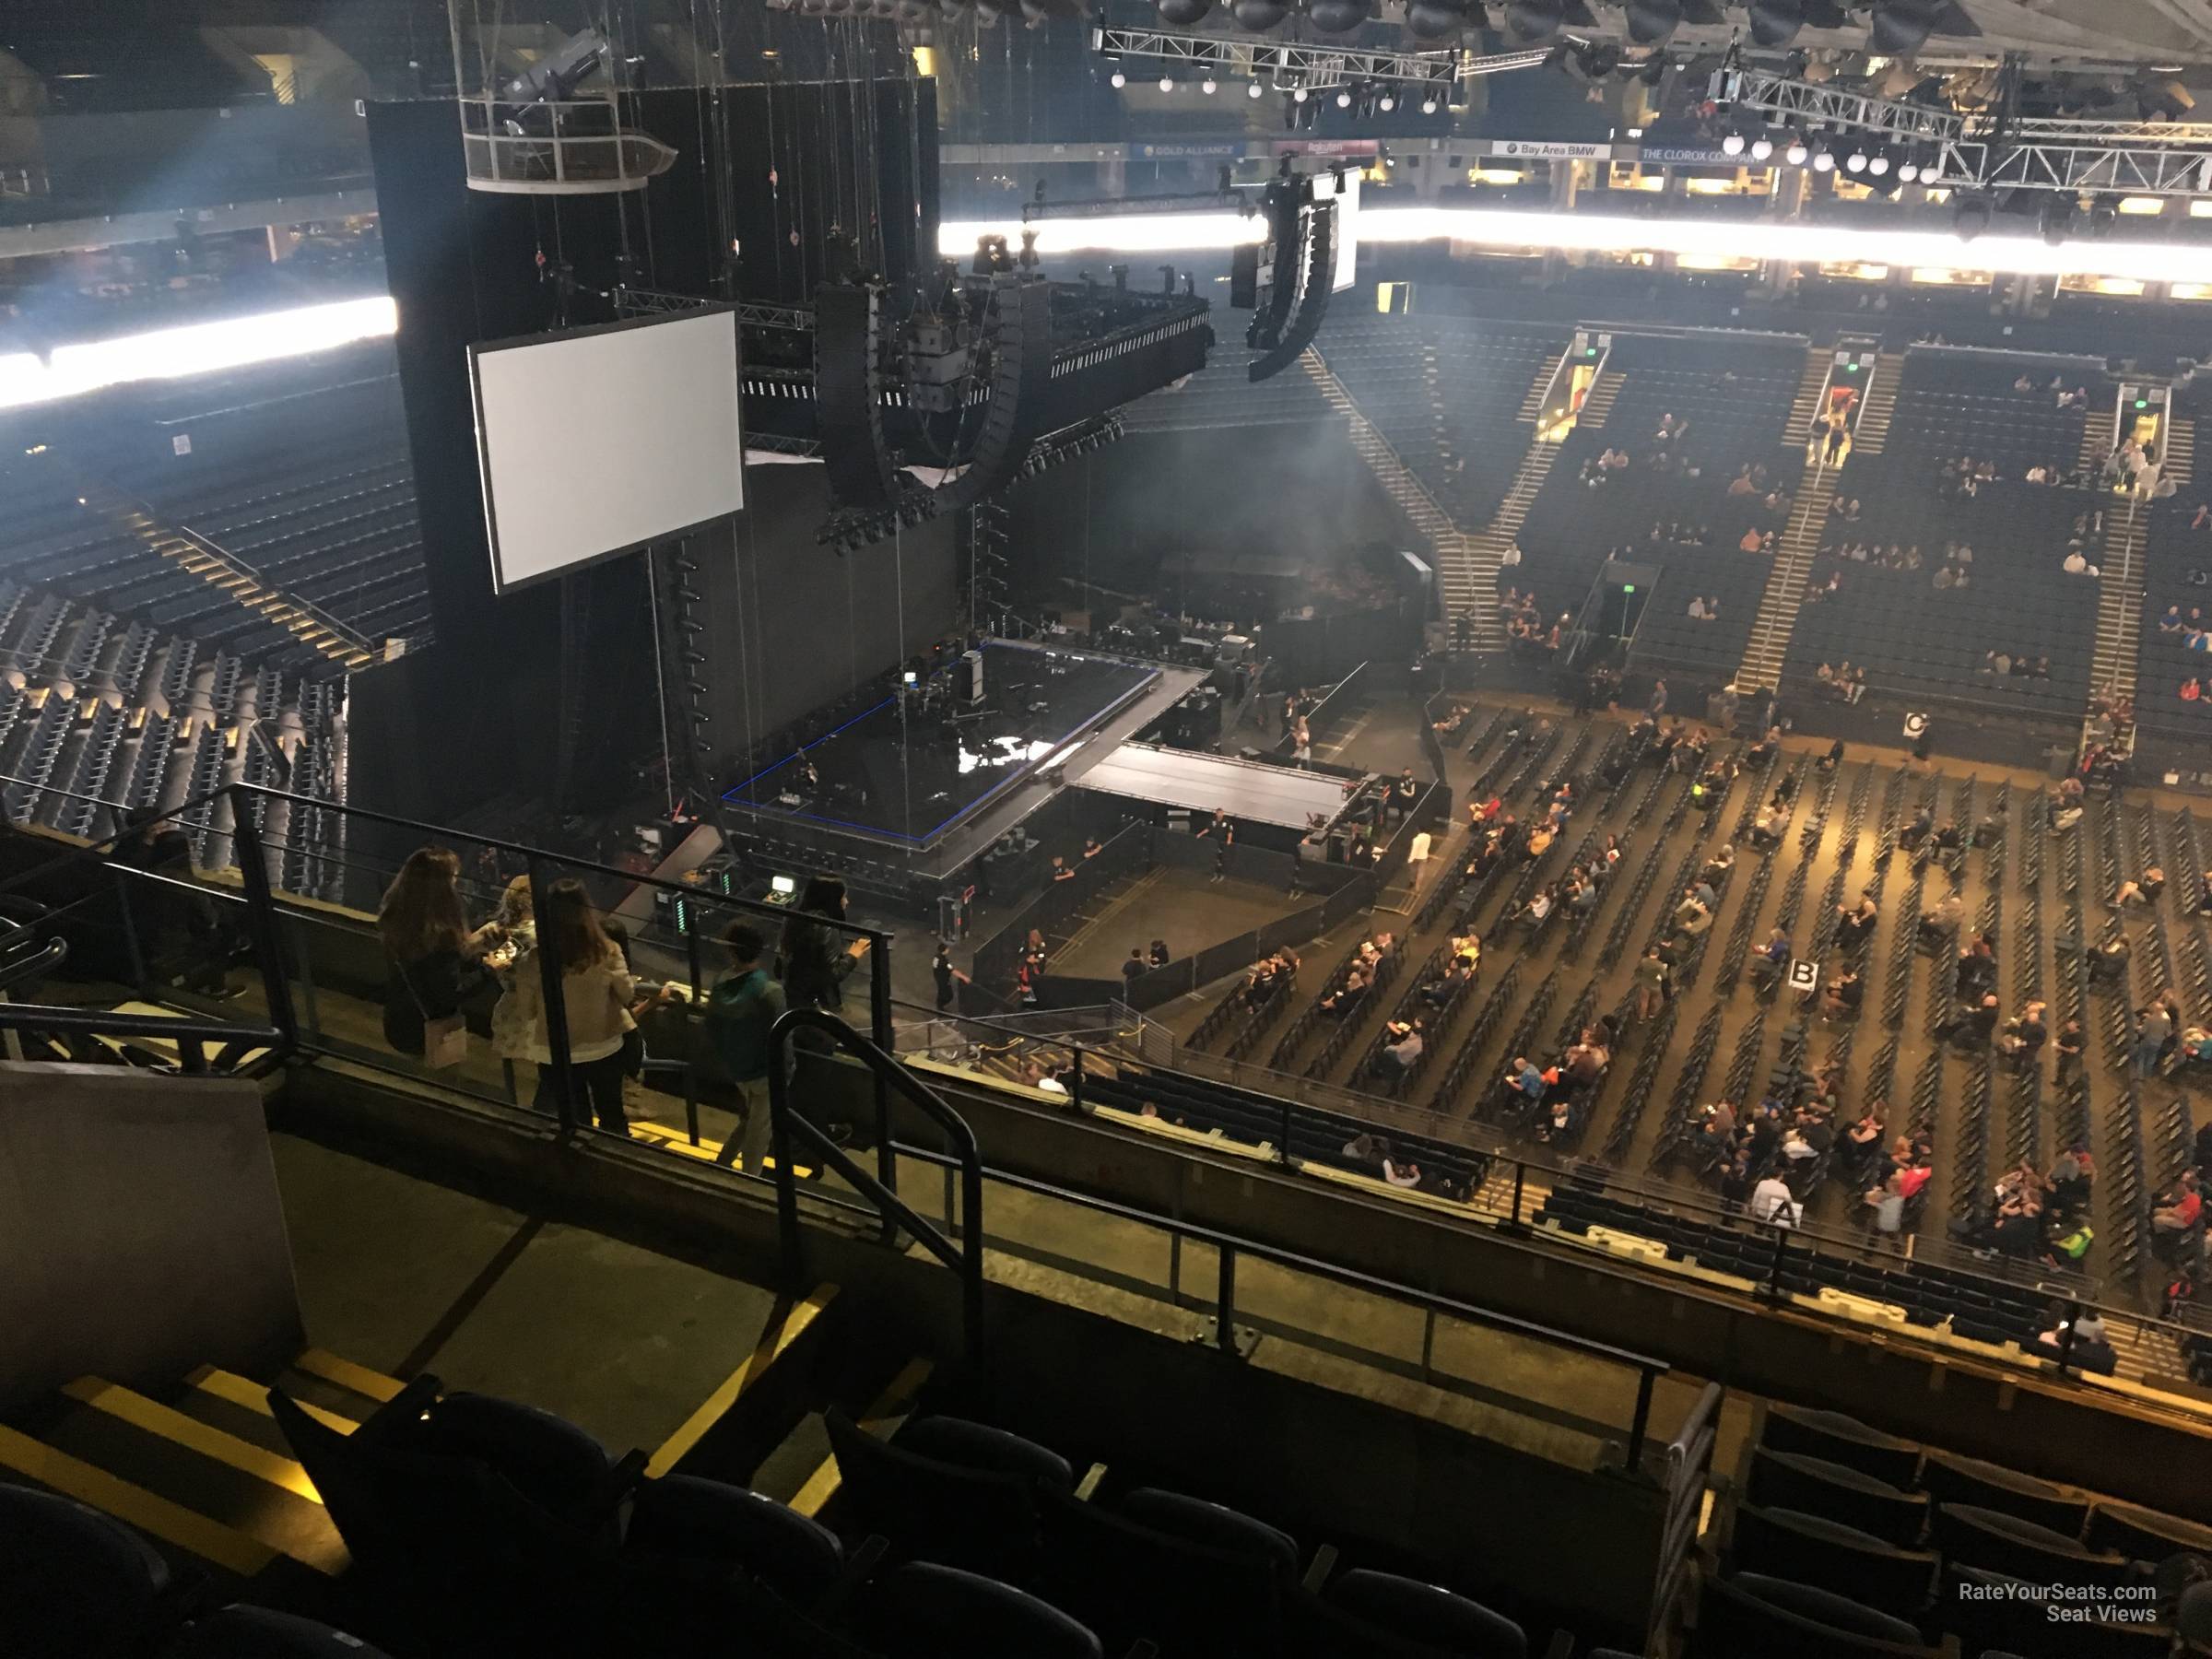 section 217, row 10 seat view  - oakland arena